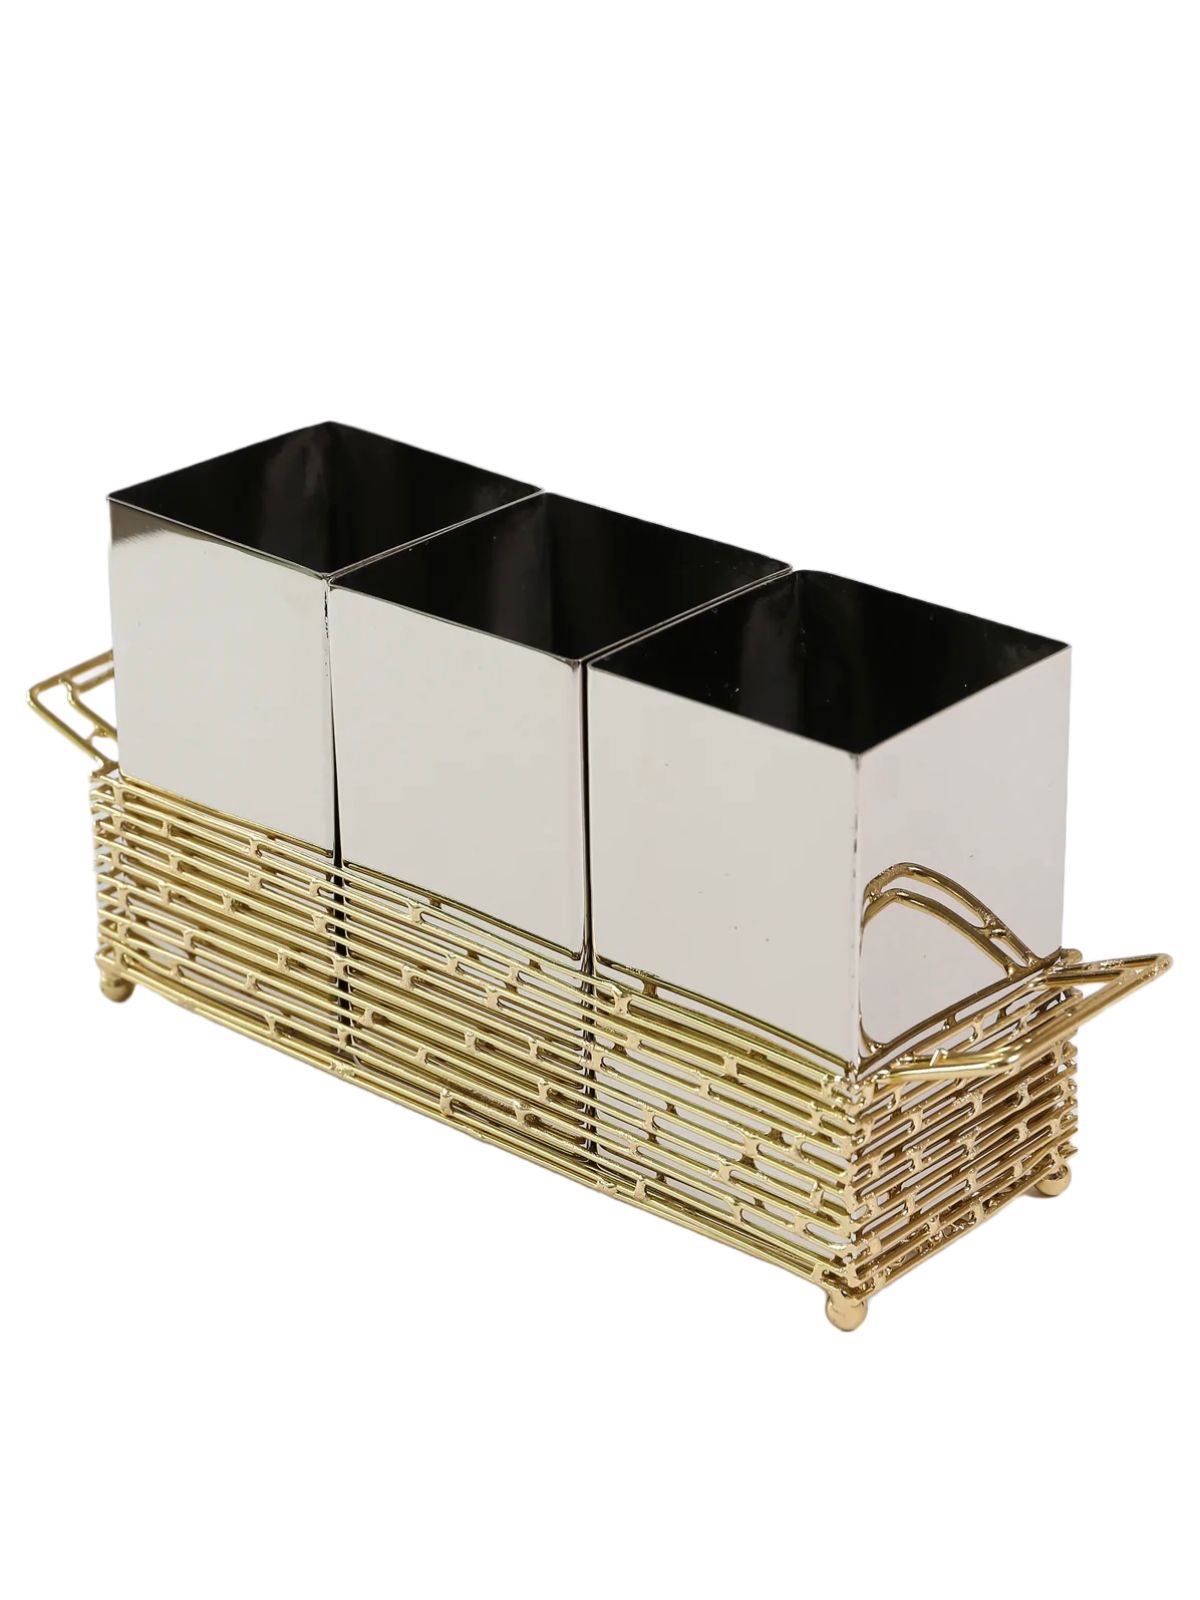 Gold Utensil Holder with Hammered Stainless Steel Inserts Sold by KYA Home Decor.